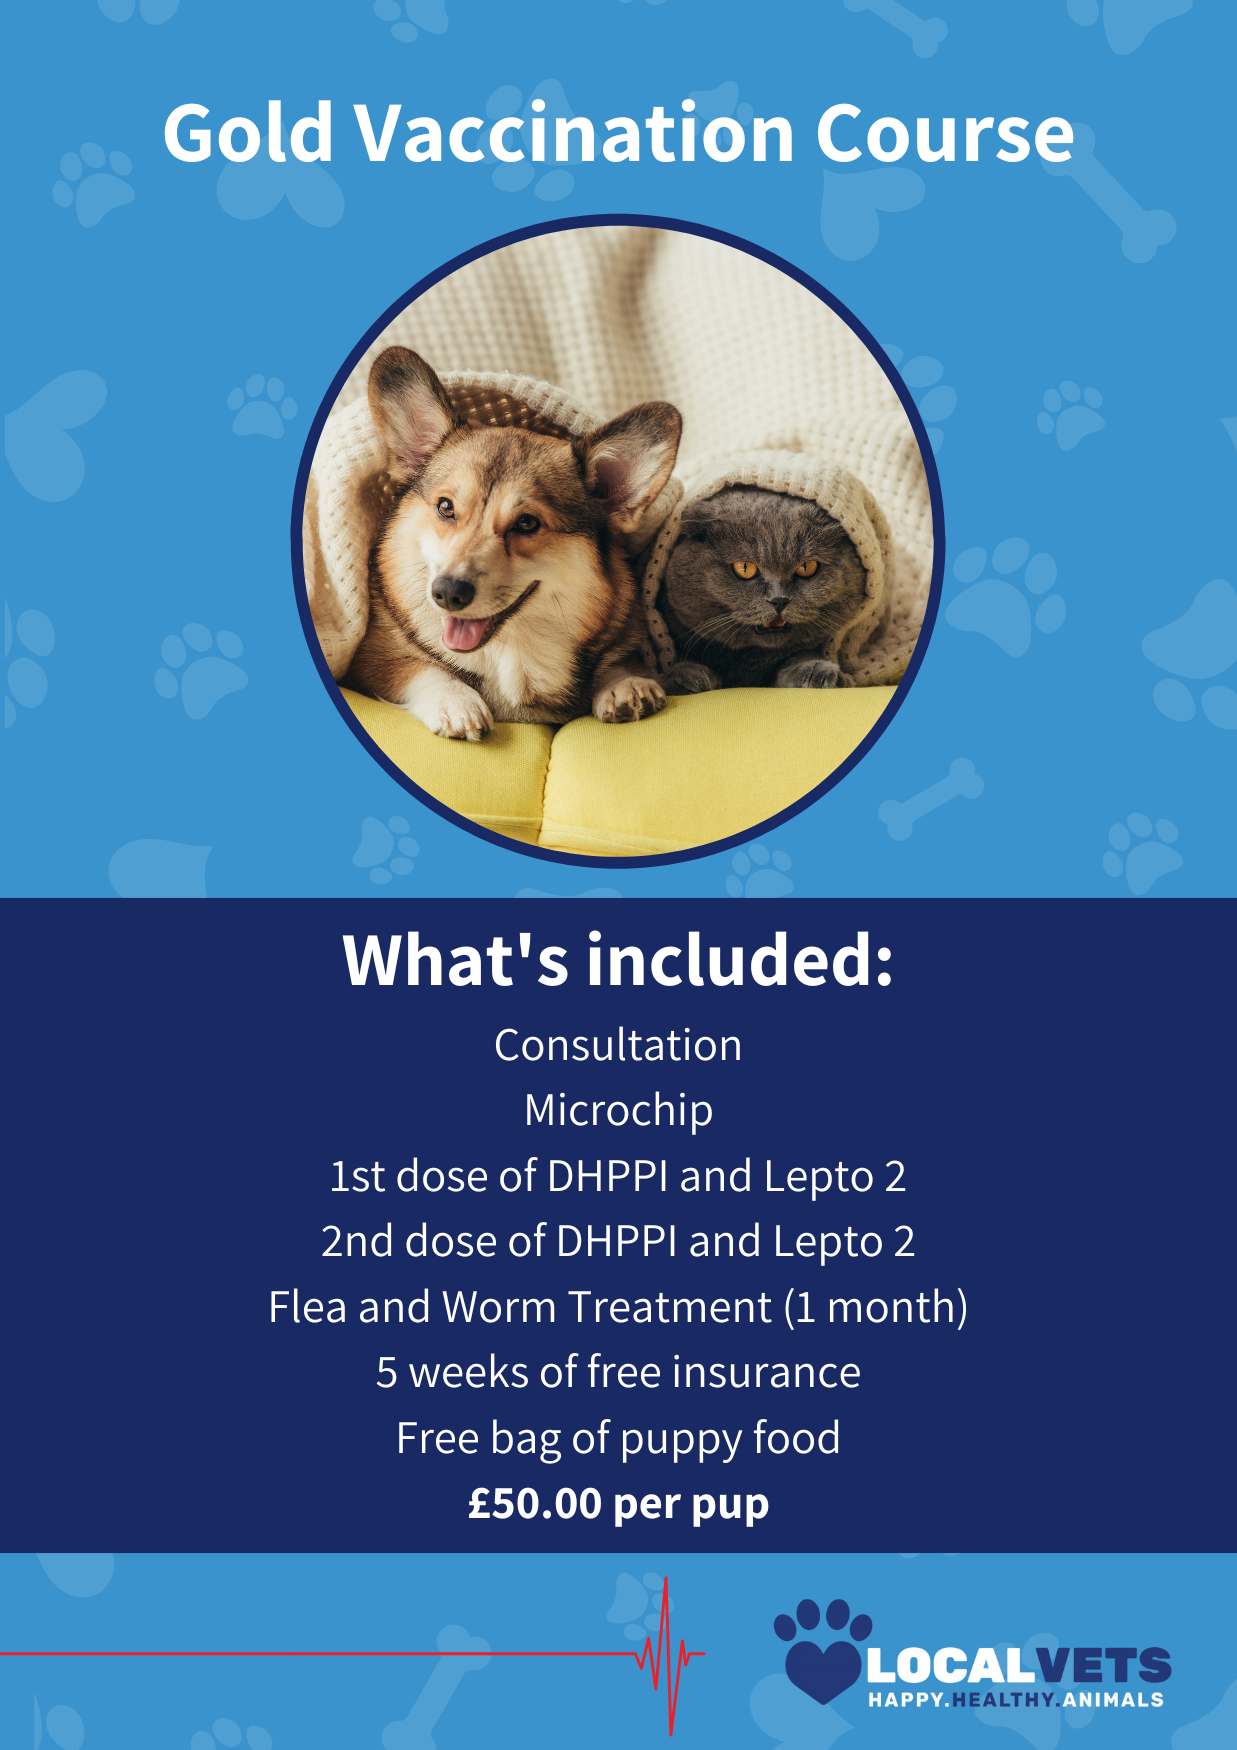 Gold vaccination package available at Local Vets